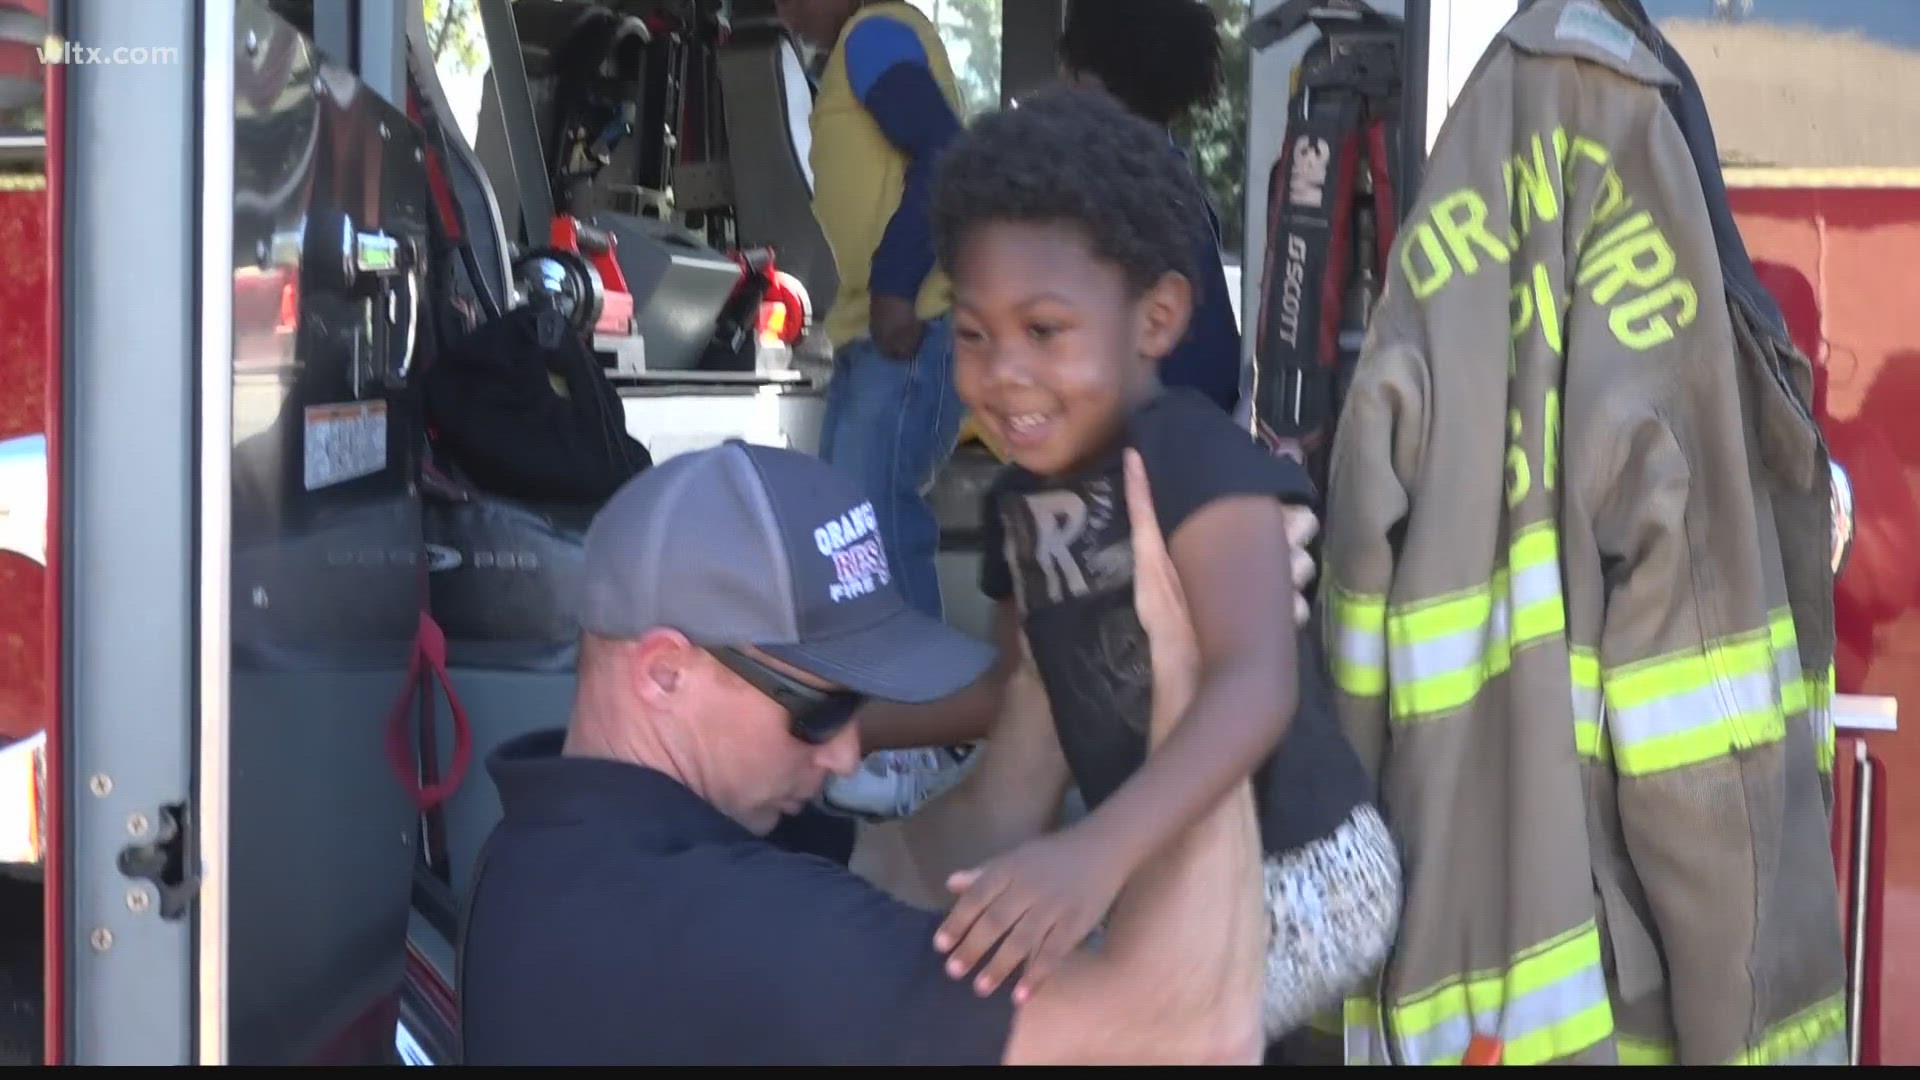 Firefighters taught children how to be safe and what to do if there is a fire.